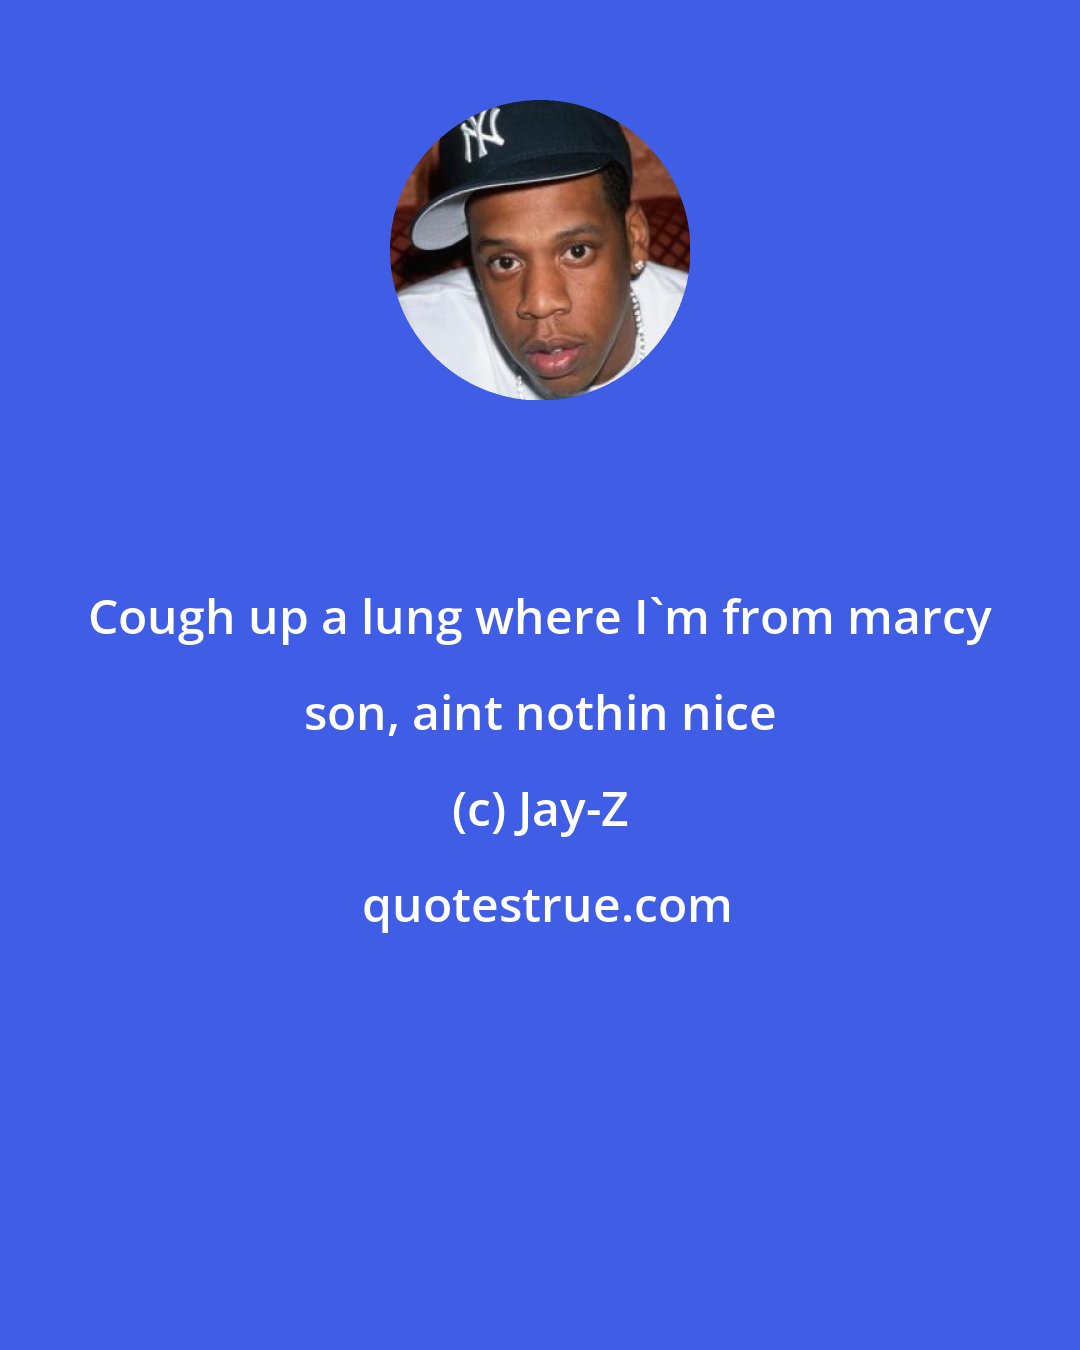 Jay-Z: Cough up a lung where I'm from marcy son, aint nothin nice